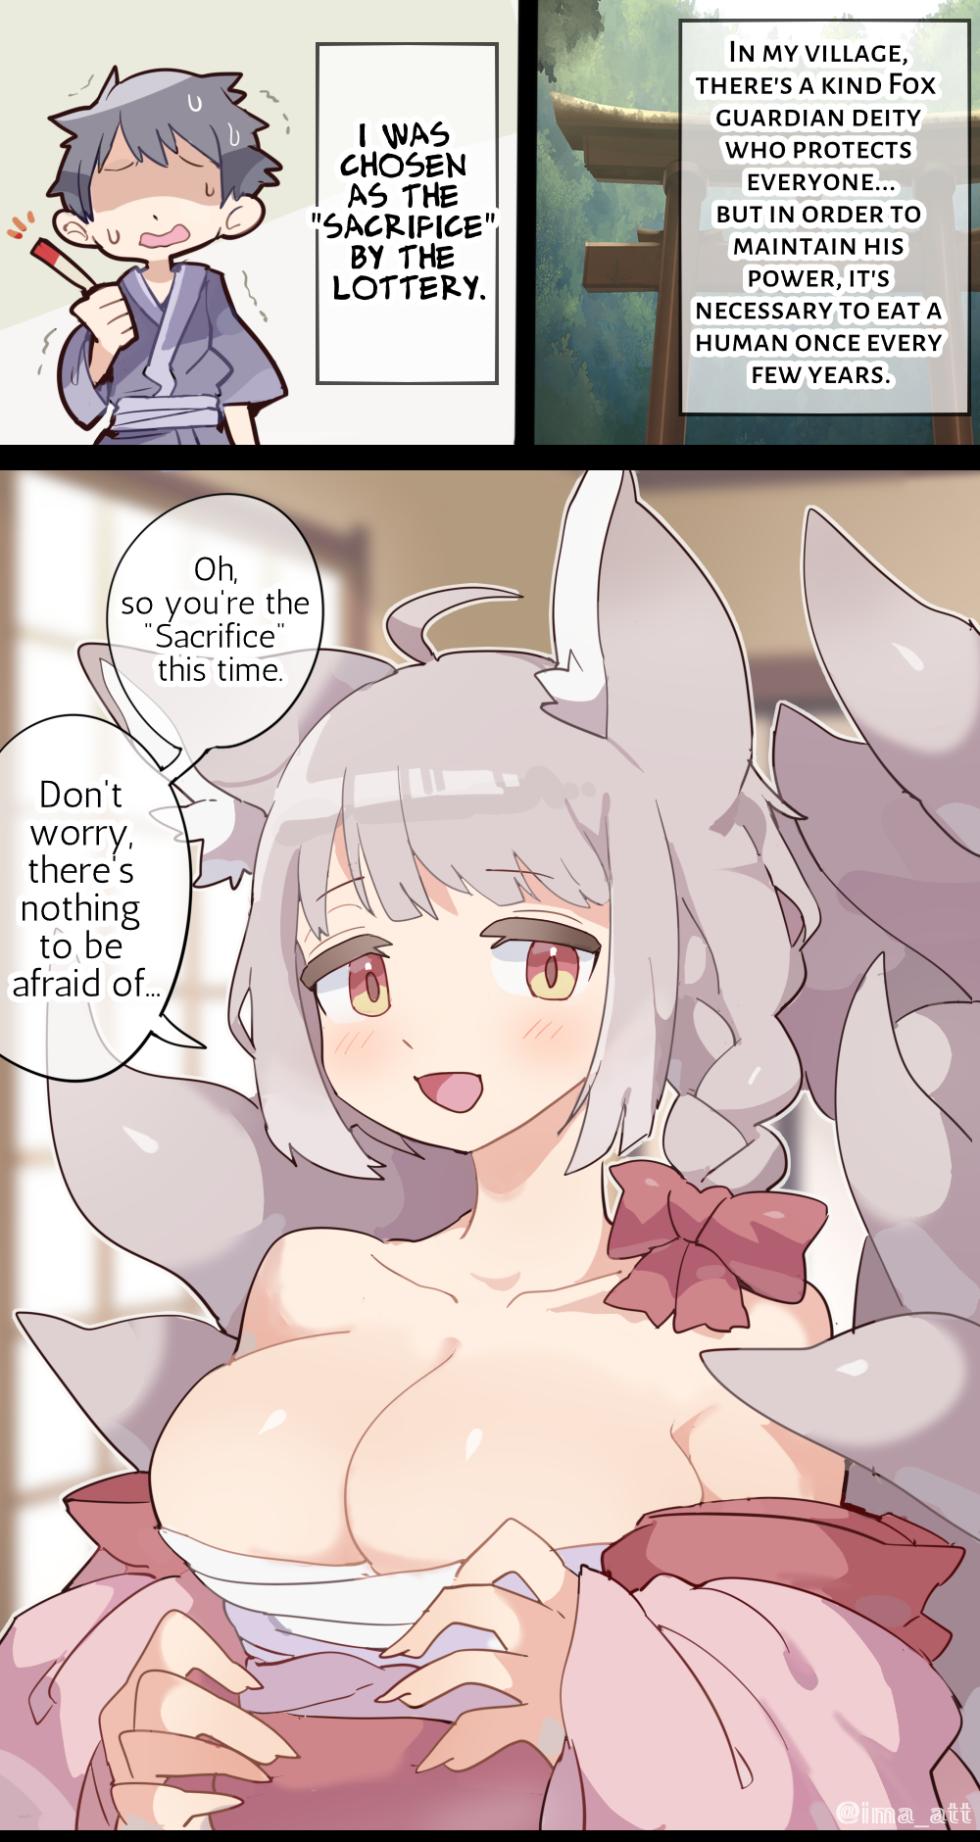 [imaat] Giant Fox Girl VORE [English / Japanese] - Page 1